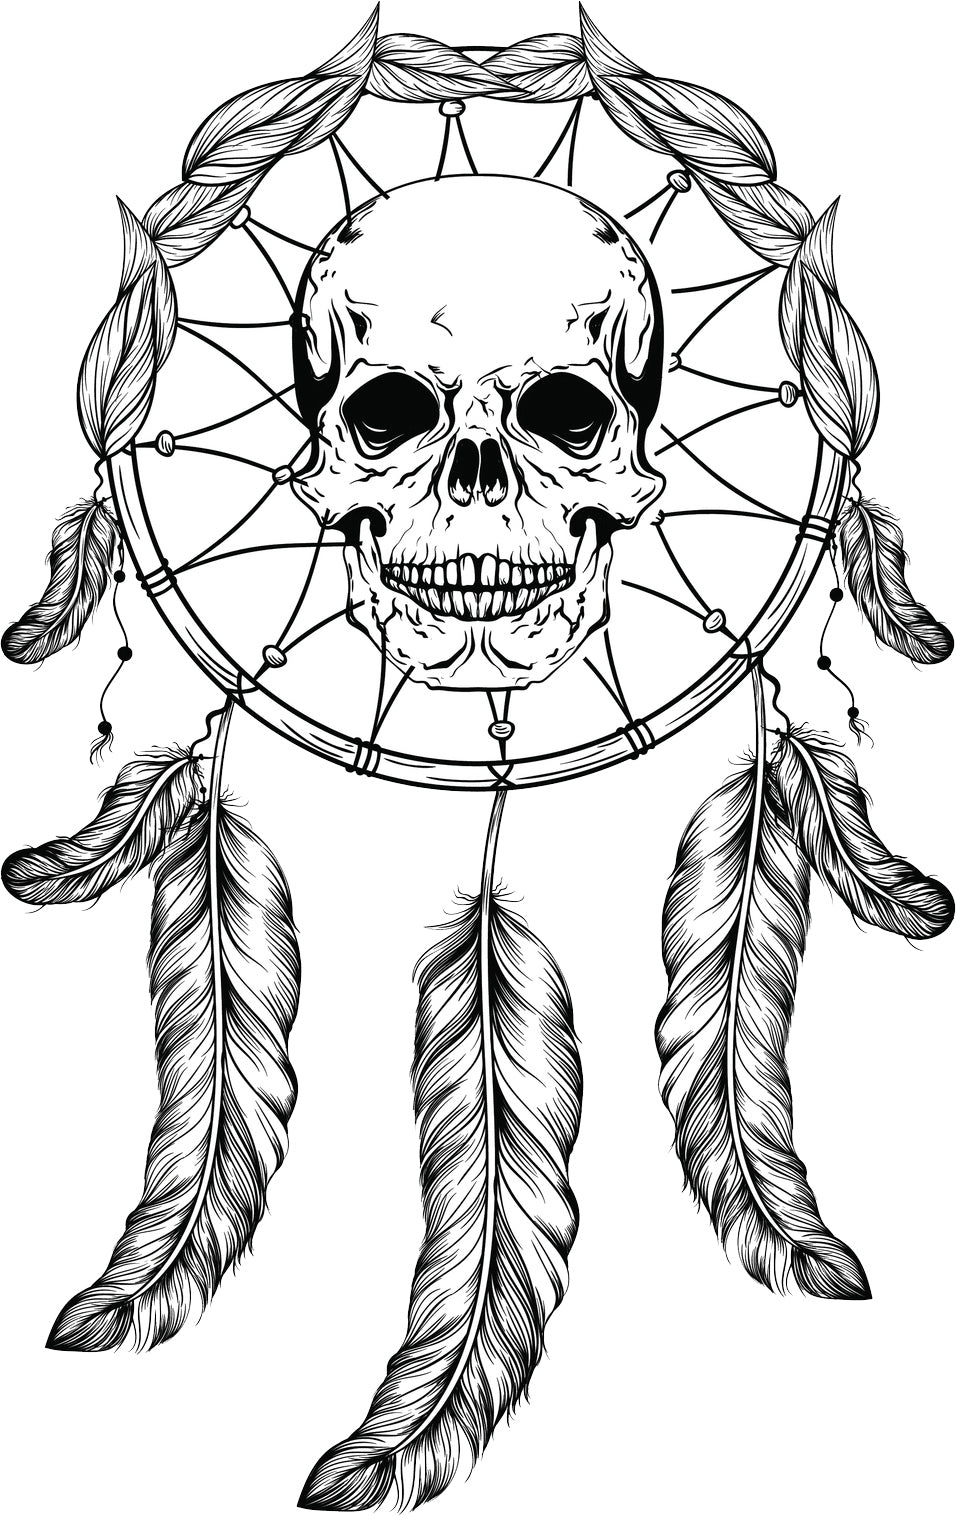 Creepy Skull in Feather Dream Catcher Drawing Vinyl Decal Sticker